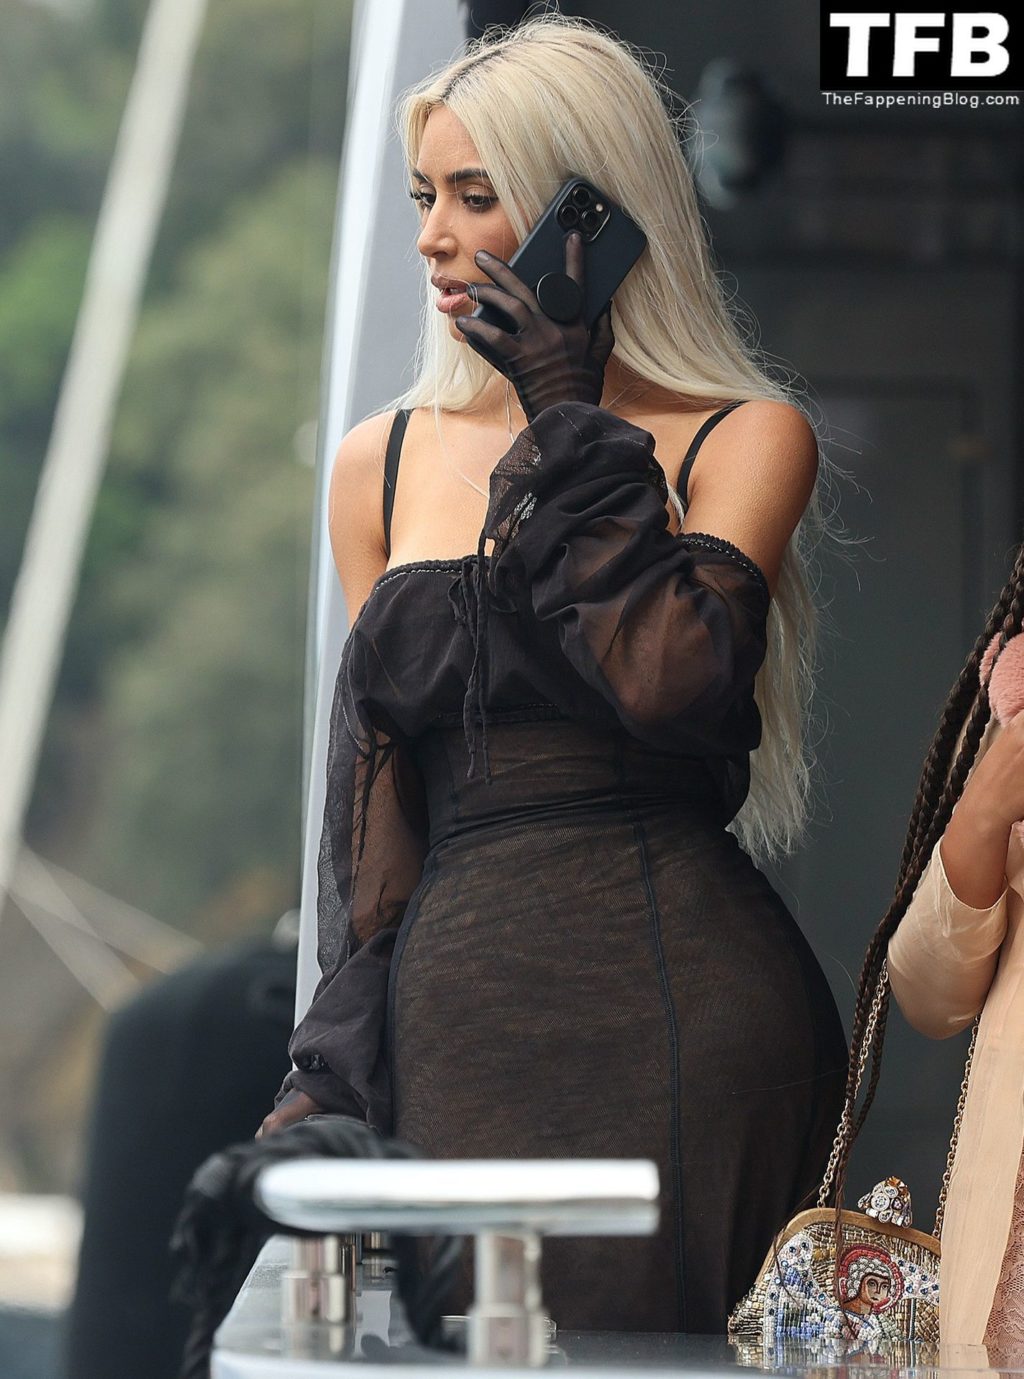 Kim Kardashian is Pictured in a Black Outfit in Portofino (28 Photos)